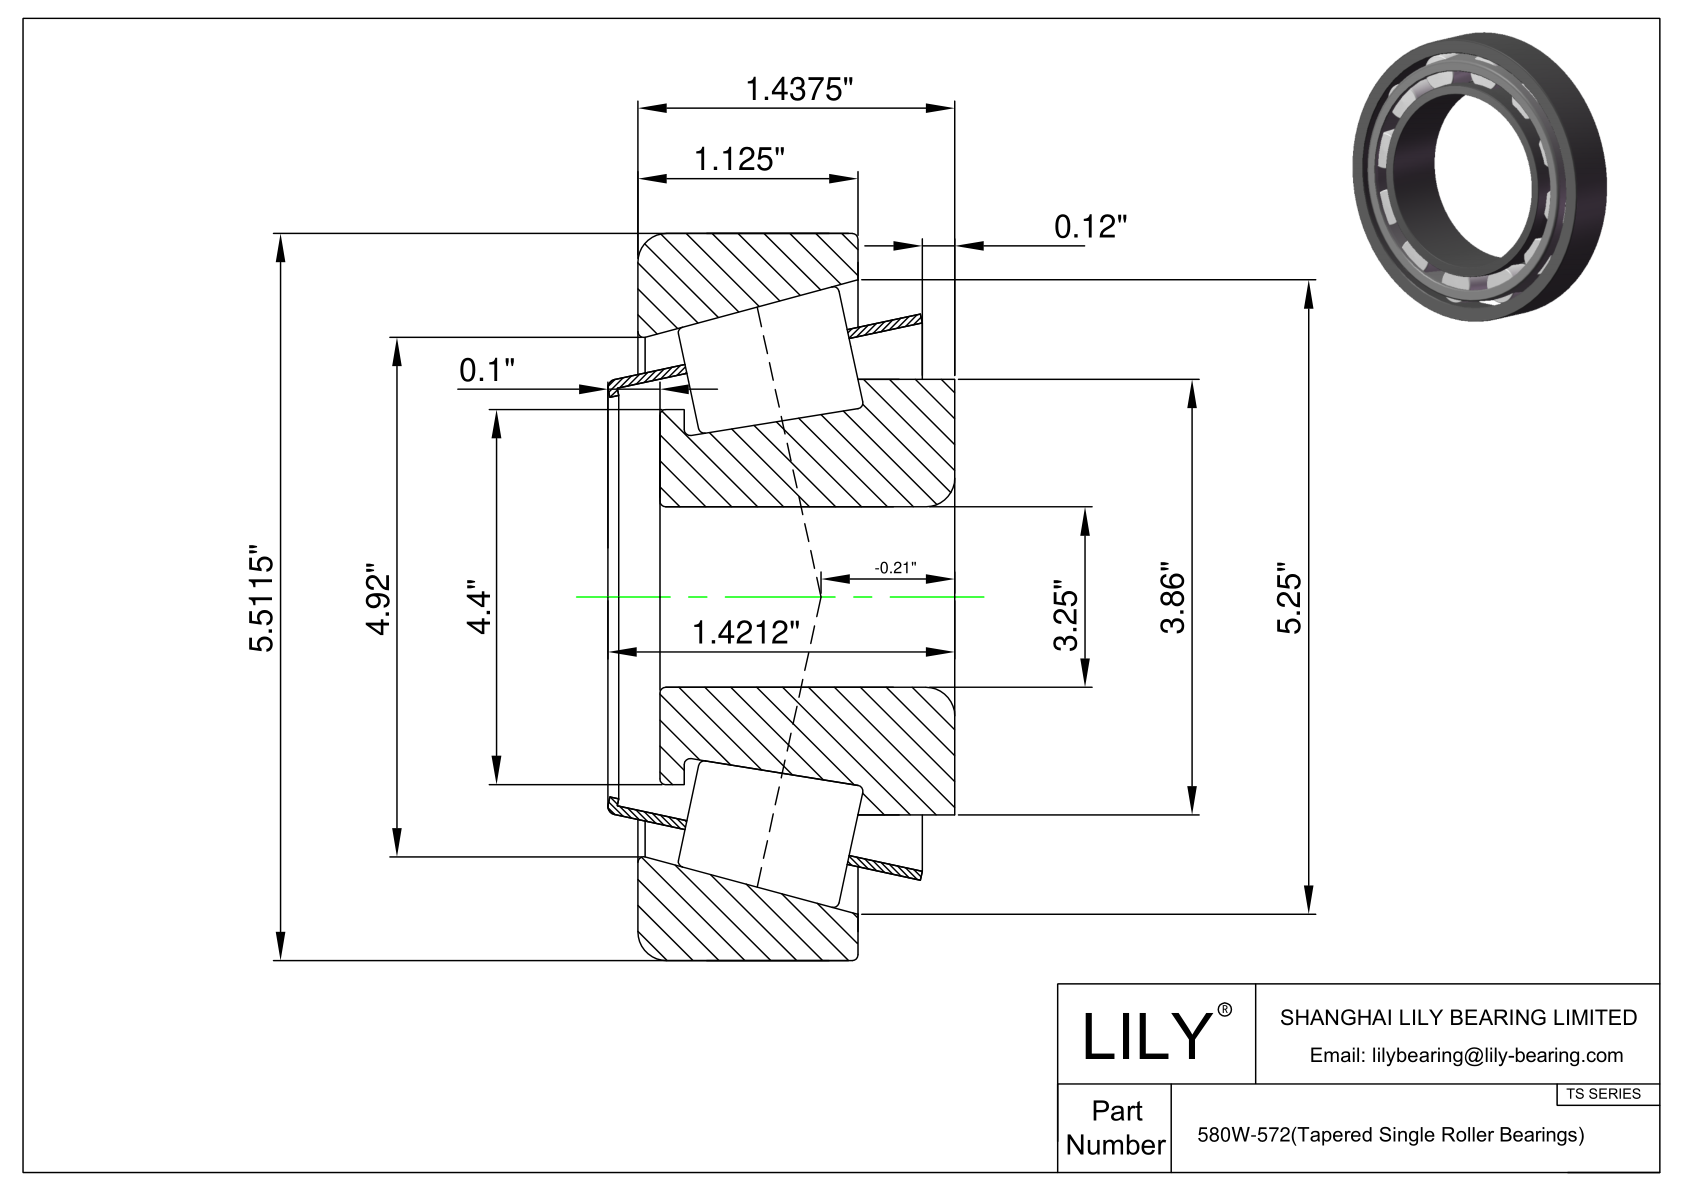 580W-572 TS (Tapered Single Roller Bearings) (Imperial) cad drawing